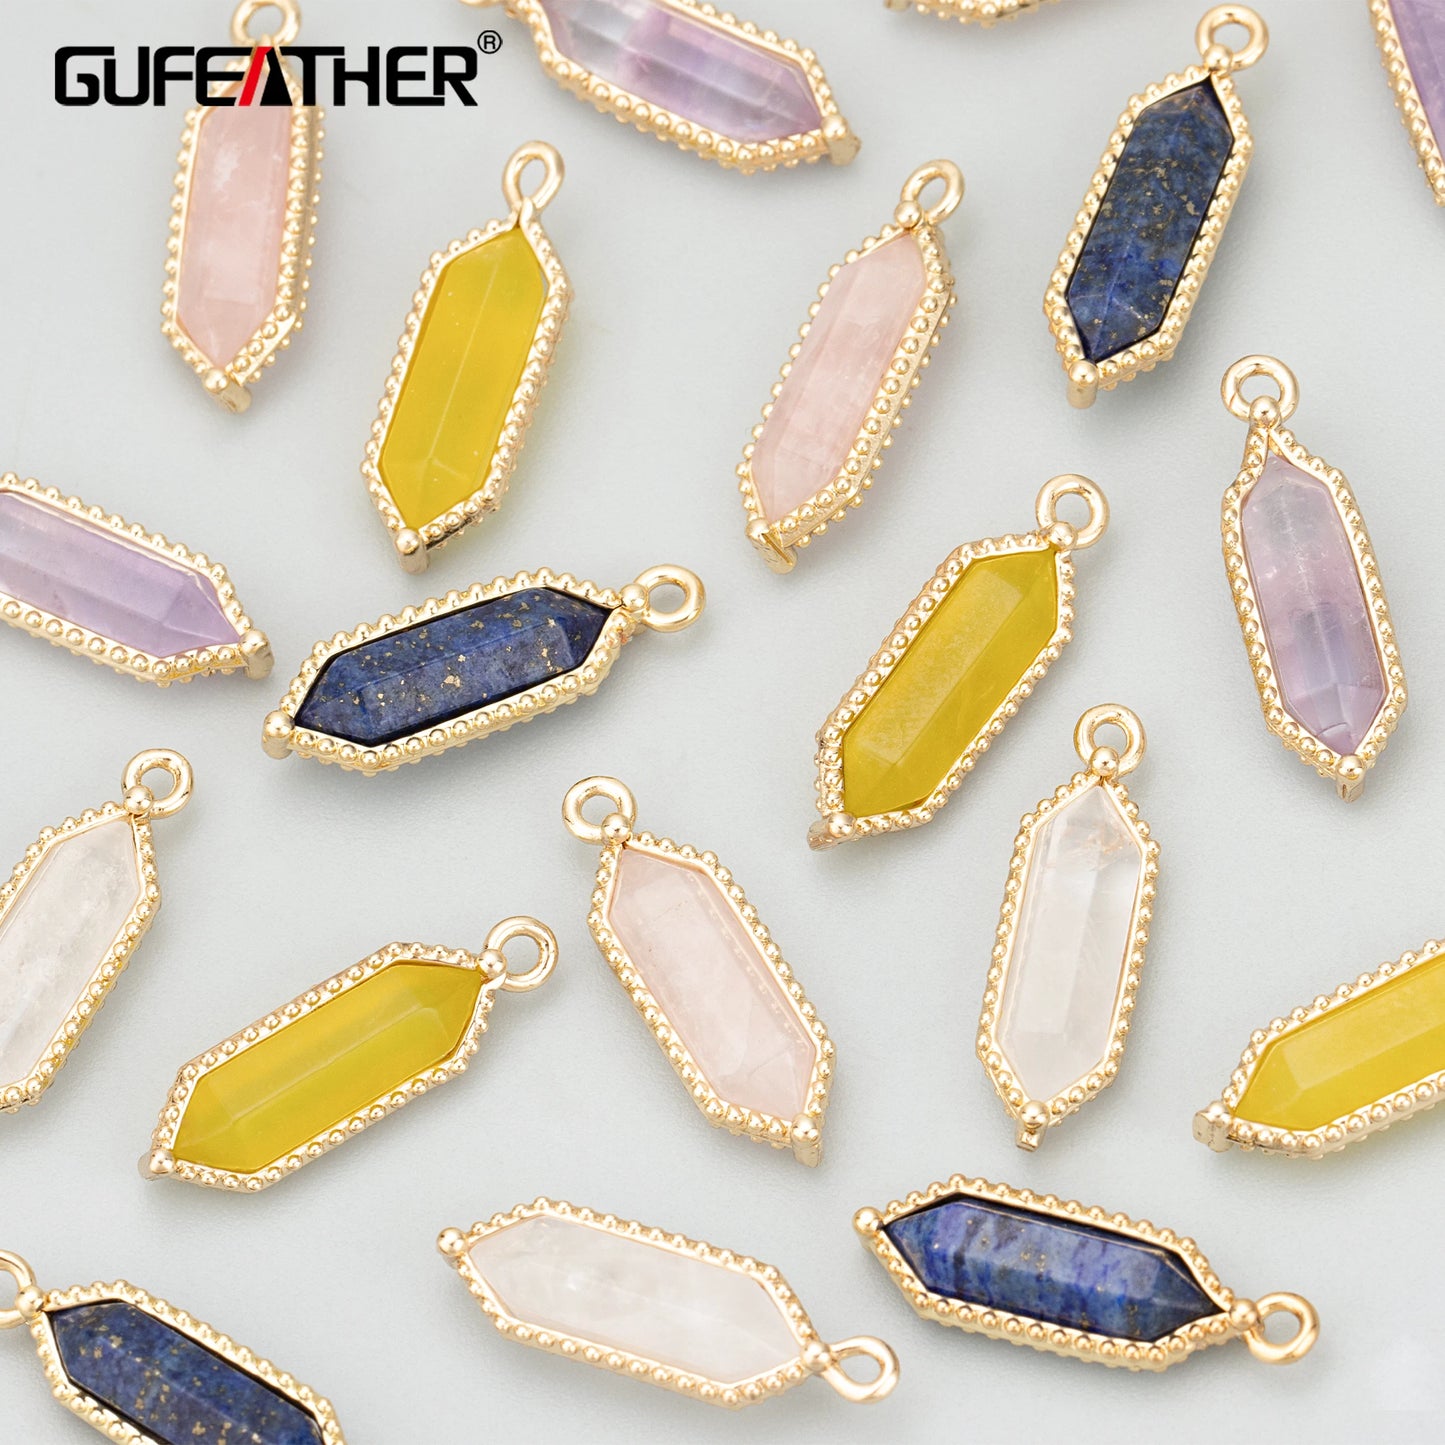 GUFEATHER MD78,jewelry accessories,18k gold plated,copper,natural stone,hand made,charms,diy pendants,jewelry making,6pcs/lot